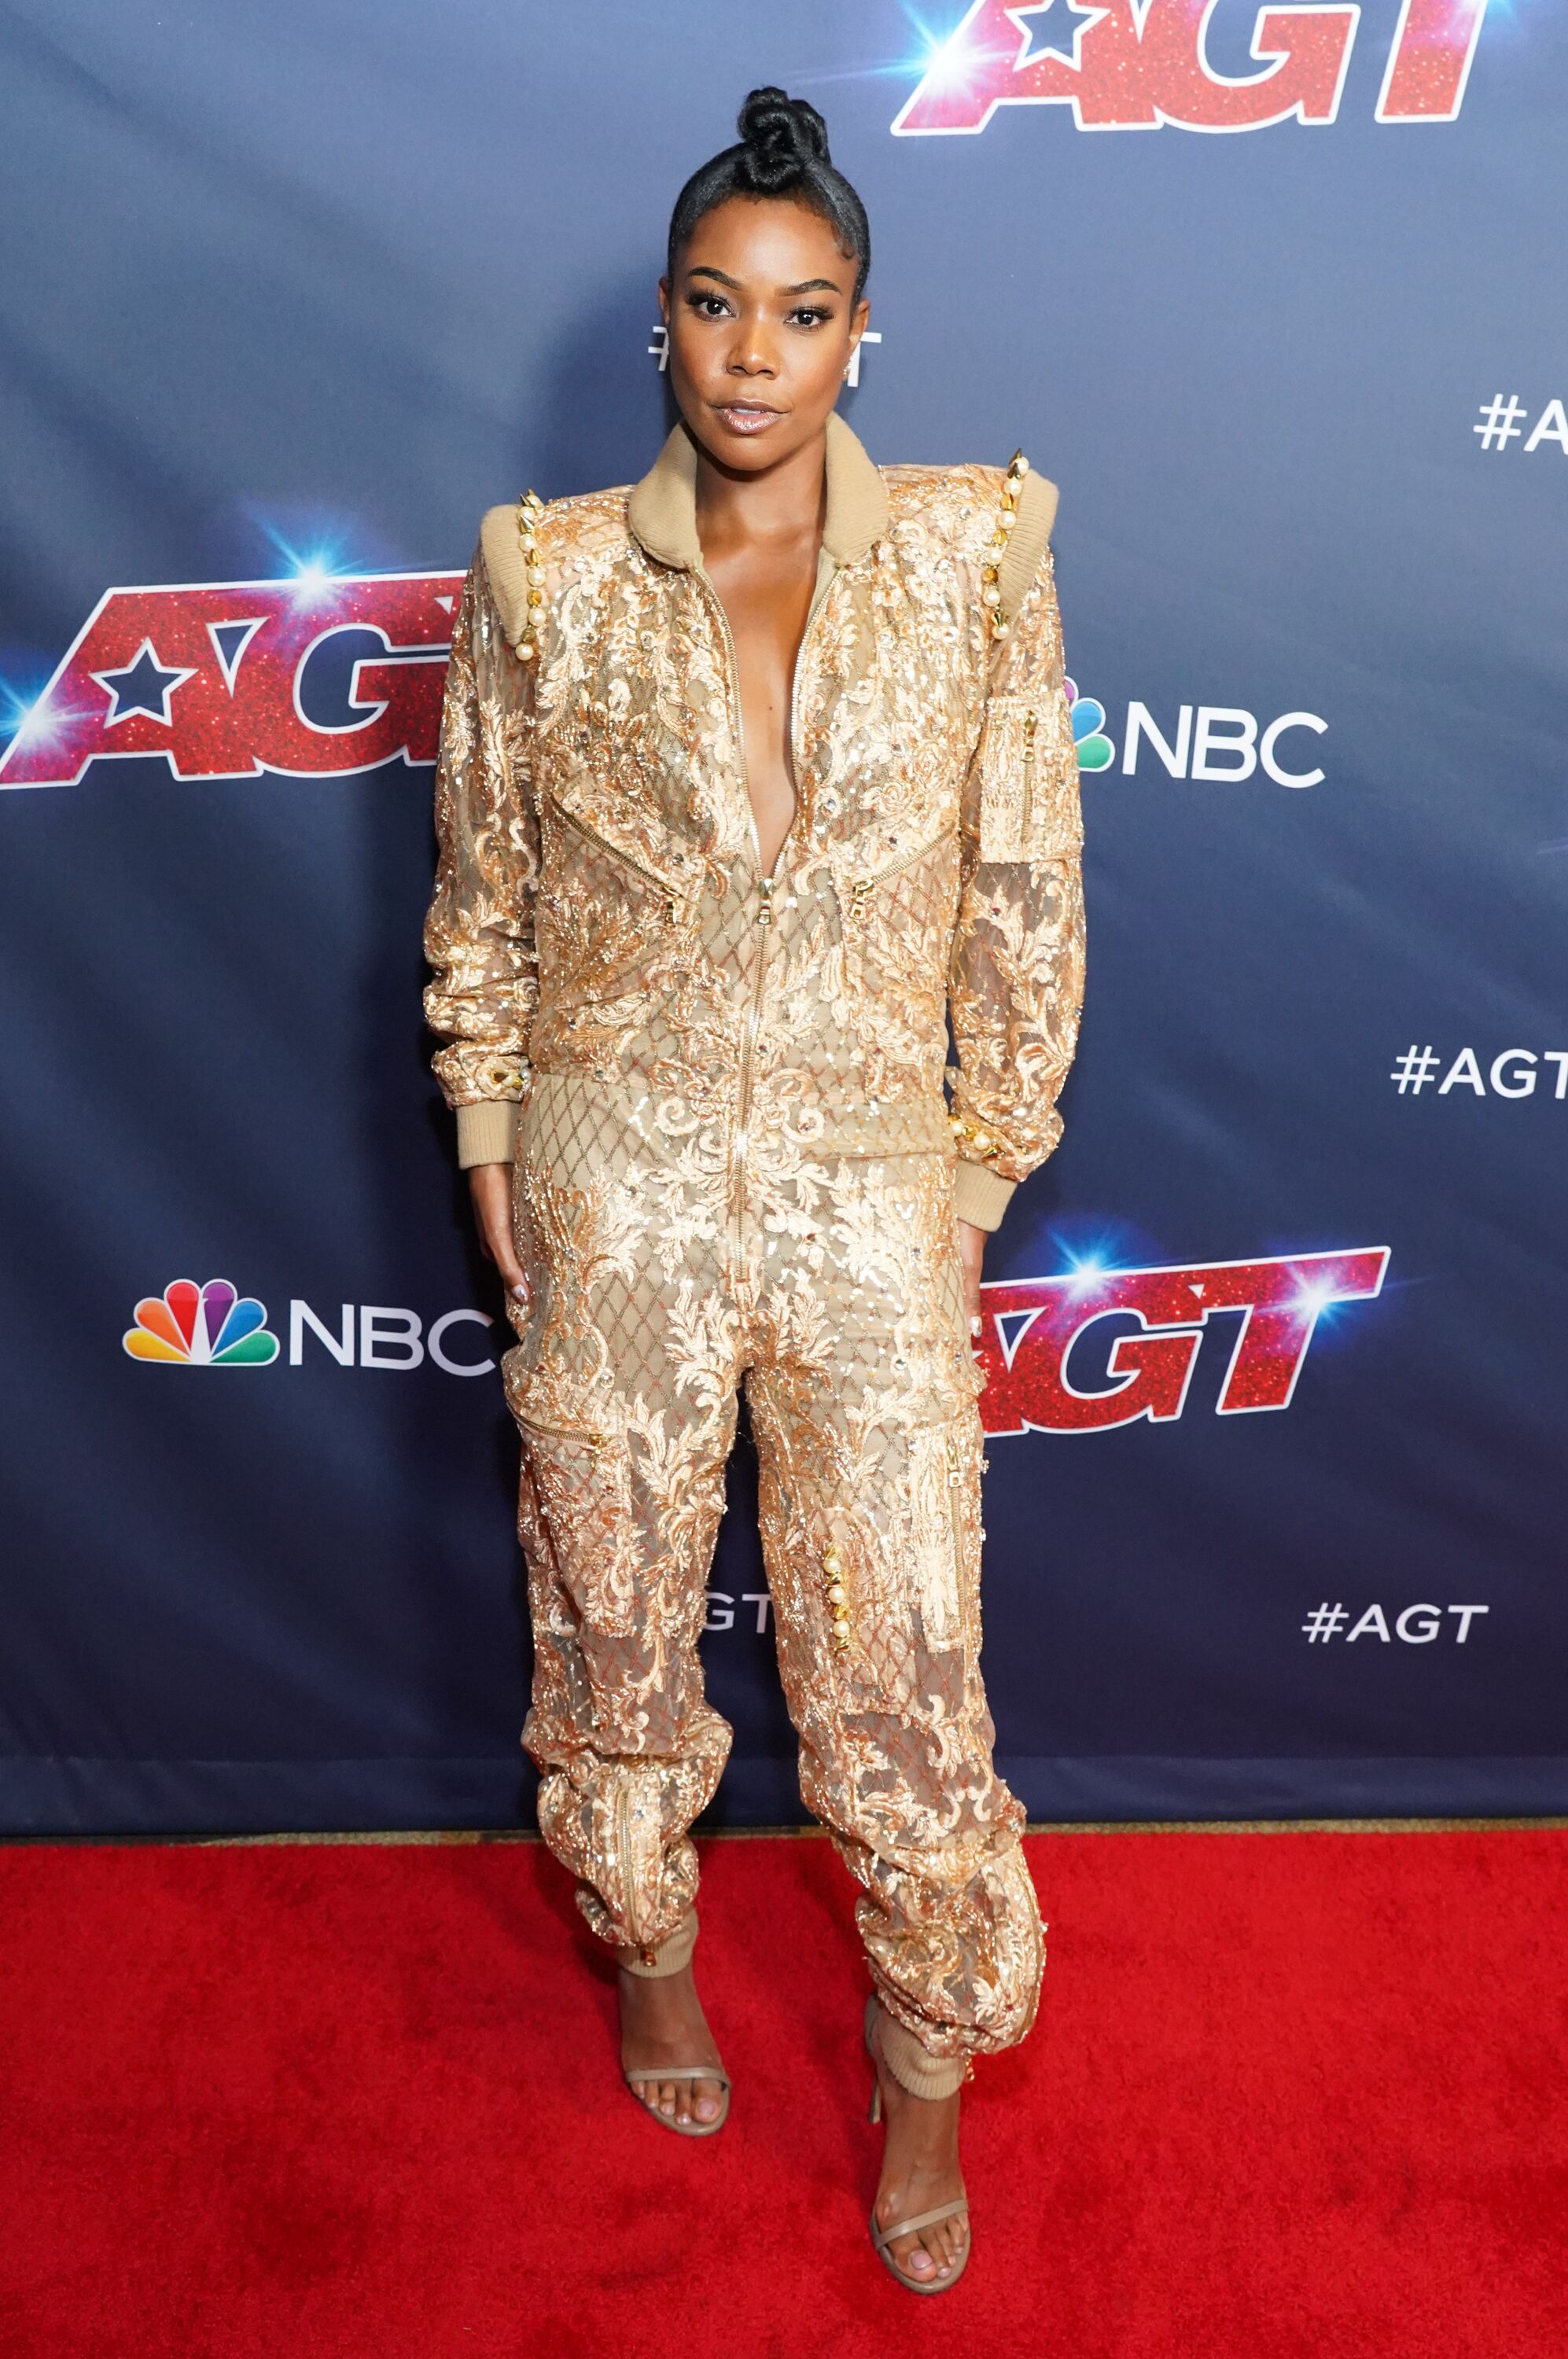 Gabrielle Union while at the "America's Got Talent" red carpet | Source: Getty Images/GlobalImagesUkraine